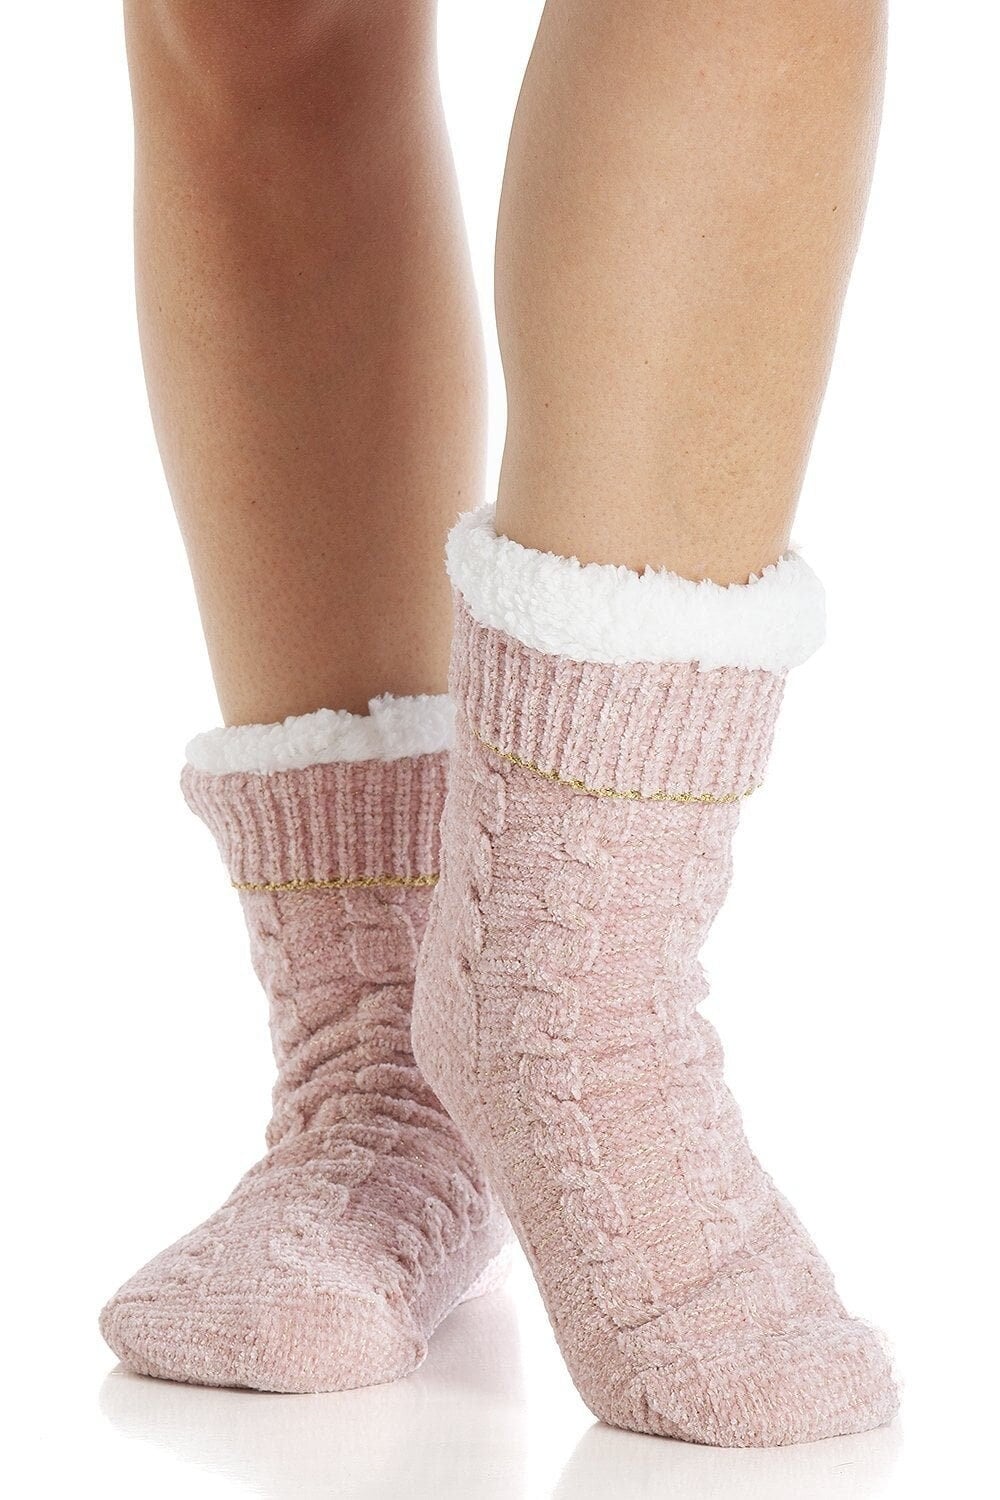 Aofa 1 Pair Socks with Grippers for Women - Hospital Socks - Non Slip Socks  Womens - Grip Socks for Women 